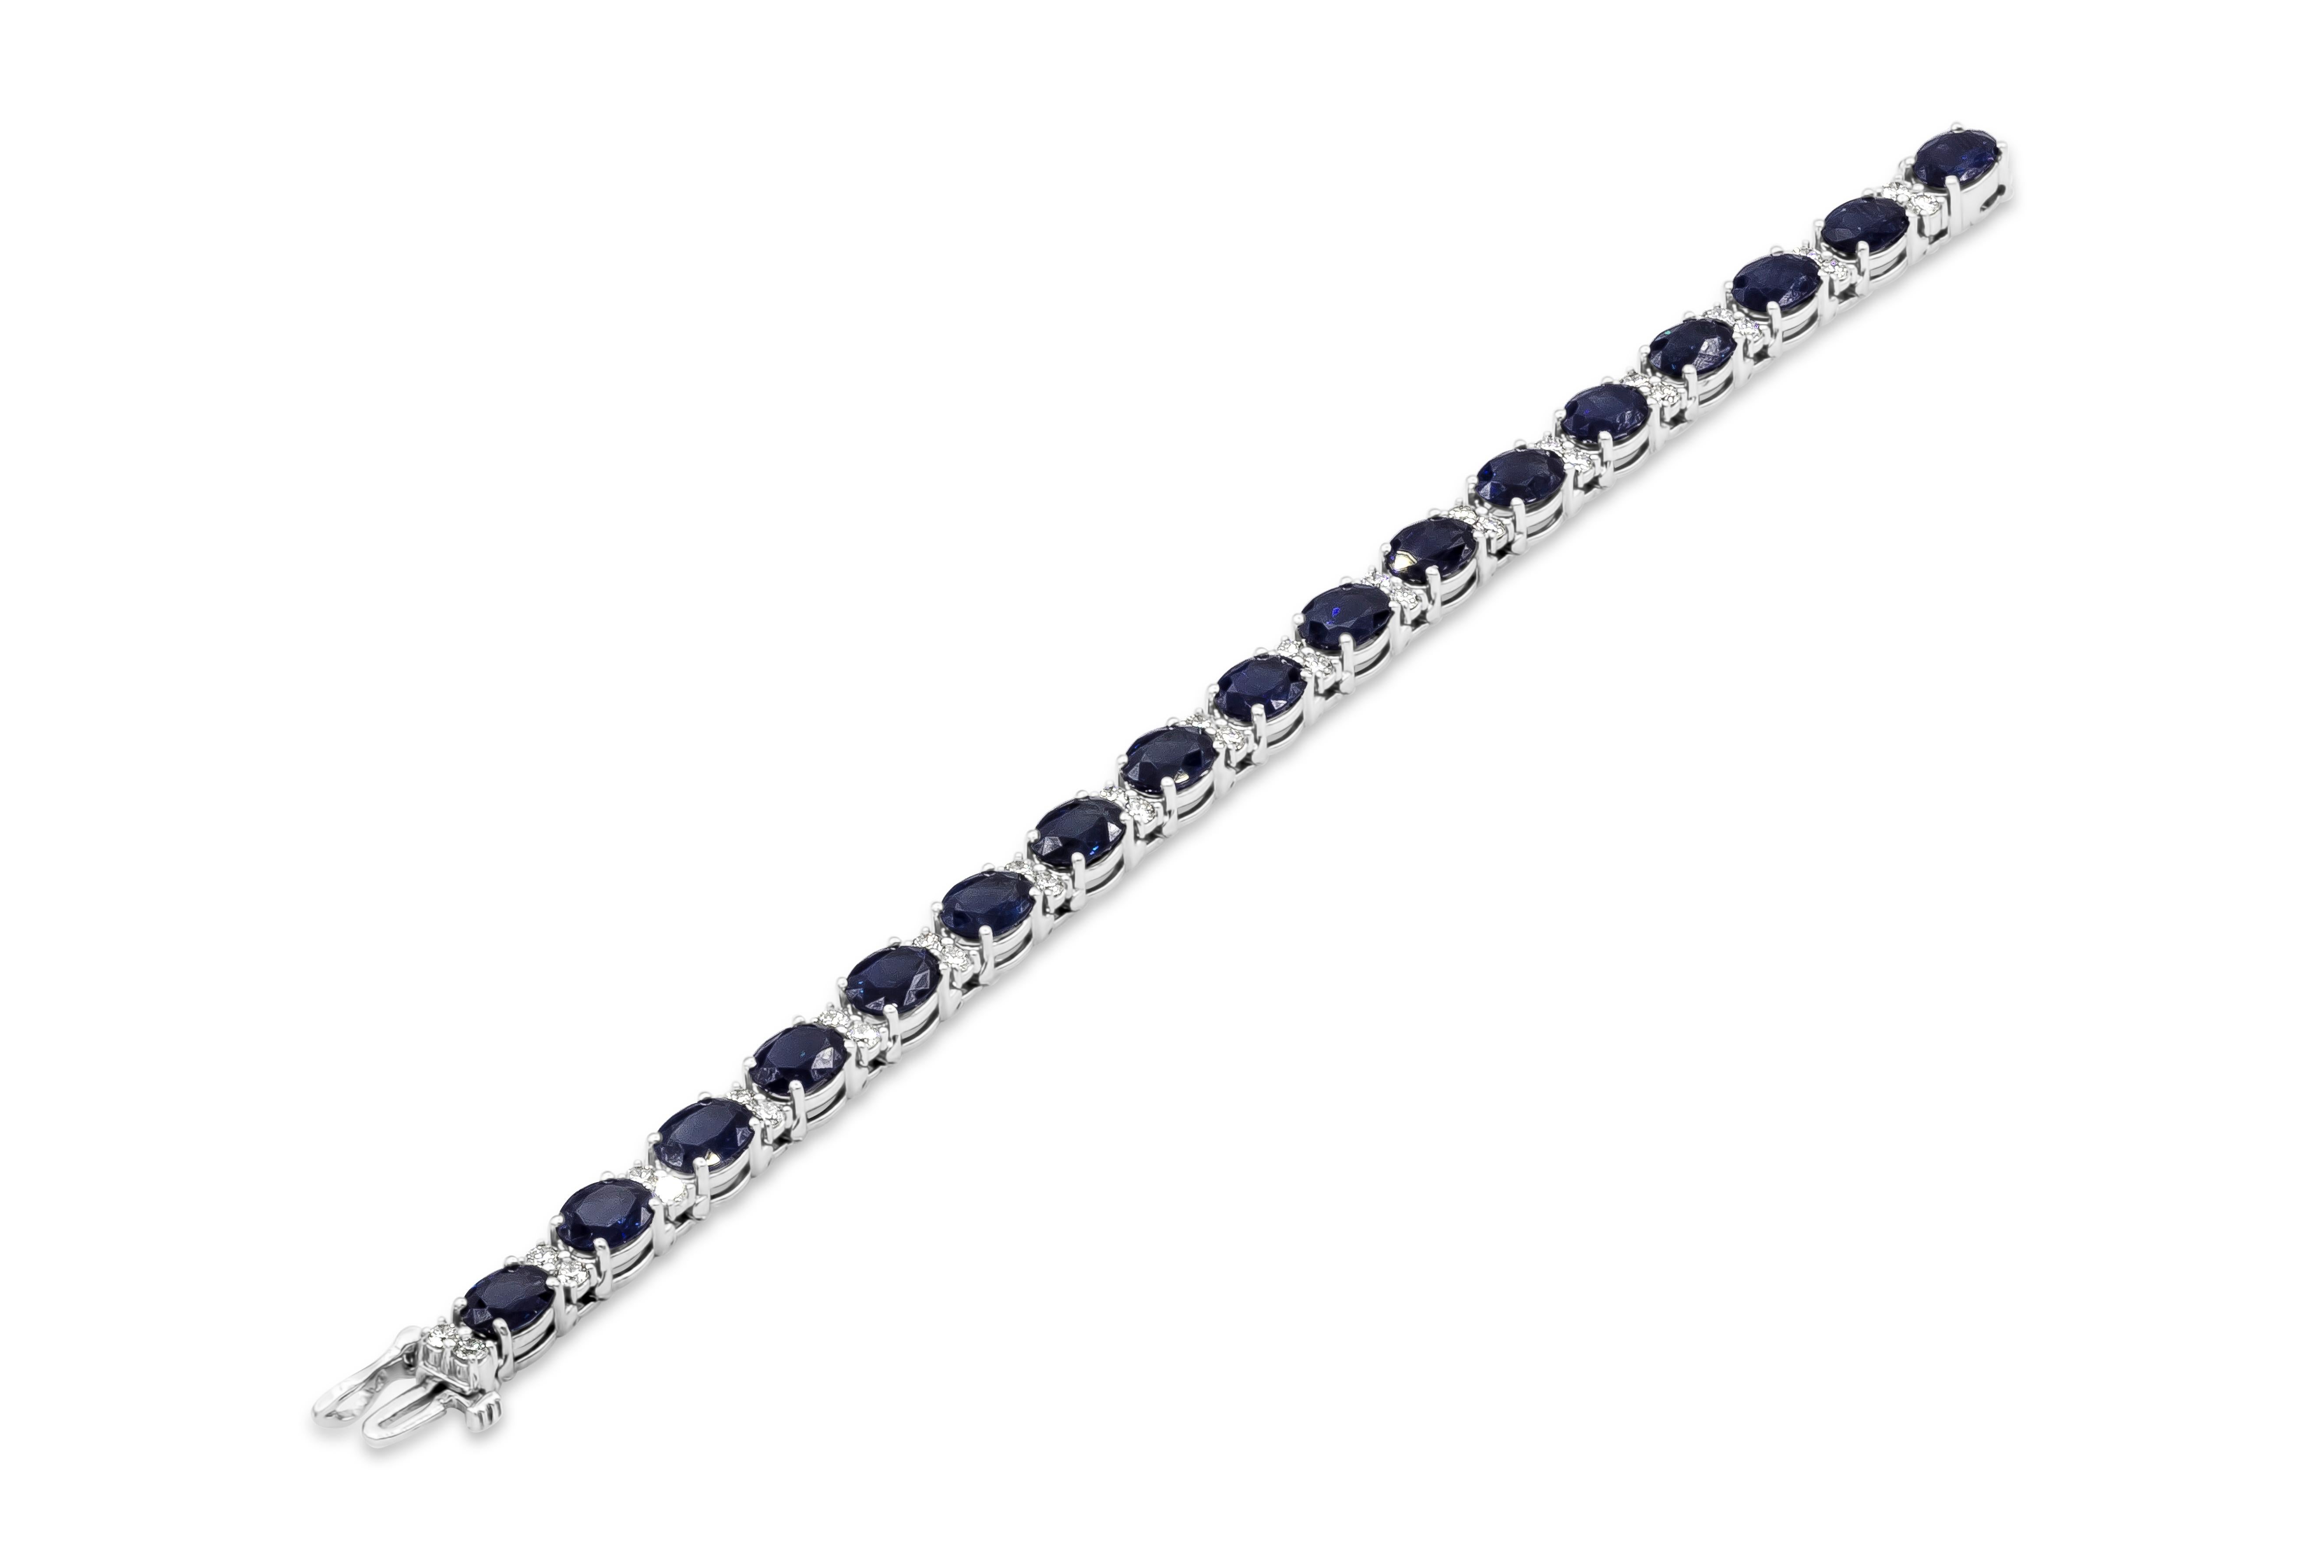 A fashionable and color-rich tennis bracelet showcasing oval cut blue sapphires weighing 28.20 carats total, spaced by round brilliant diamonds weighing 2.38 carats total. Made in 18k white gold. 

Style available in different price ranges. Prices